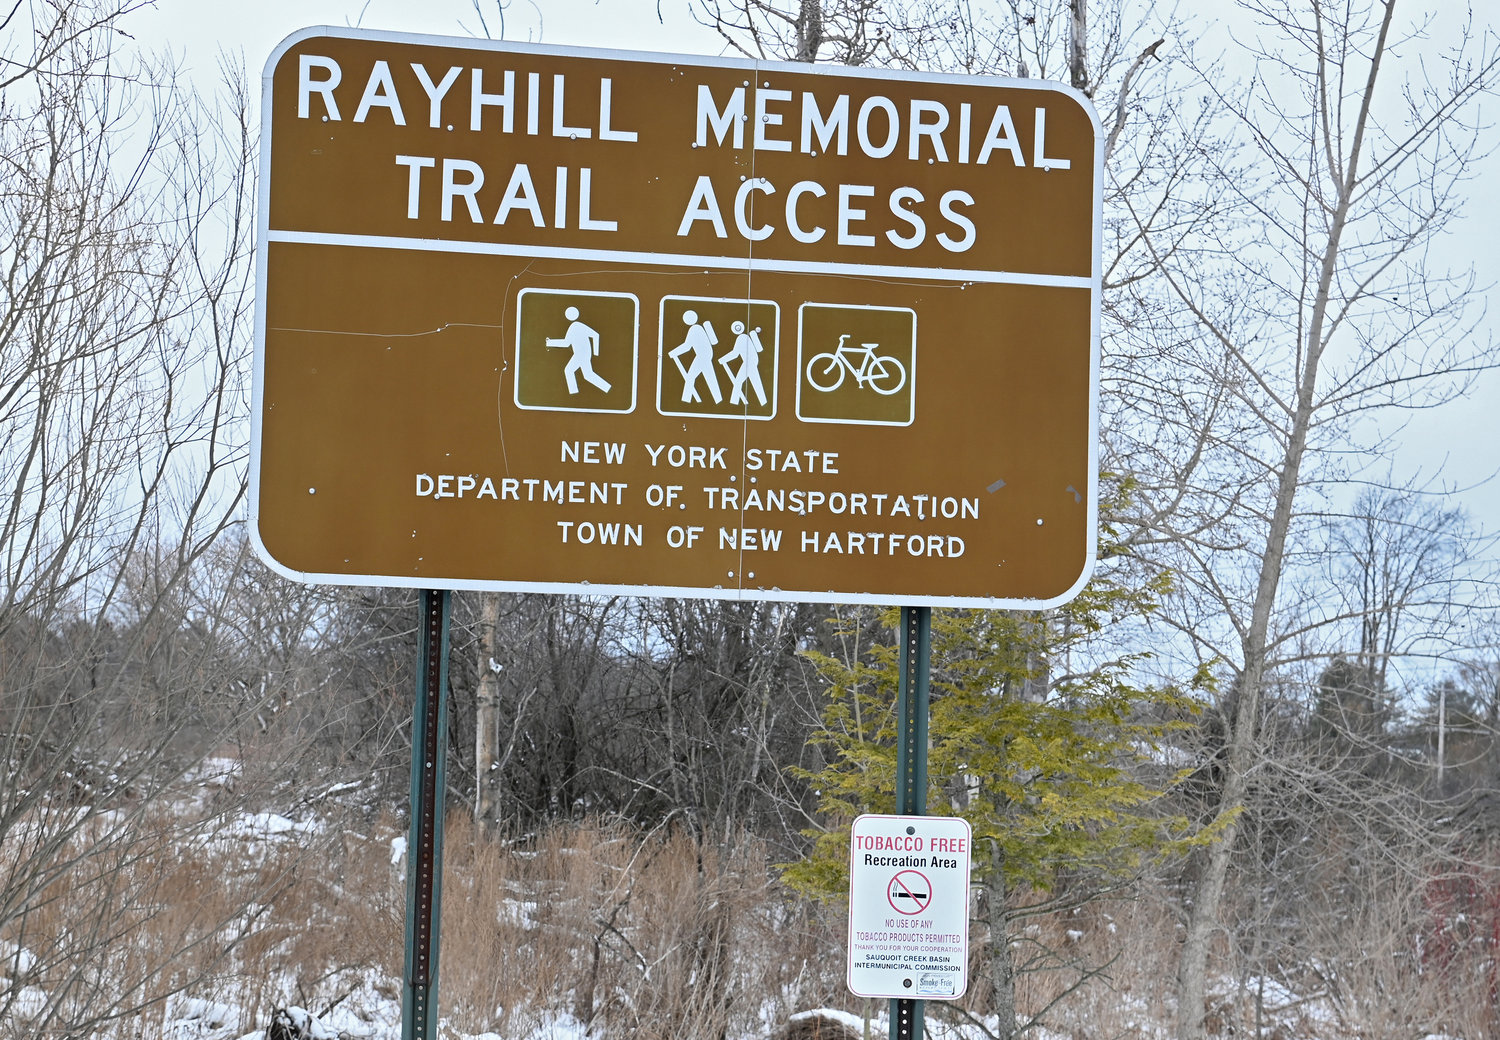 Several beaver carcasses found skinned off the Rayhill Memorial Trail in New Hartford in mid-February are under investigation by the New York State Department of Environmental Conservation.